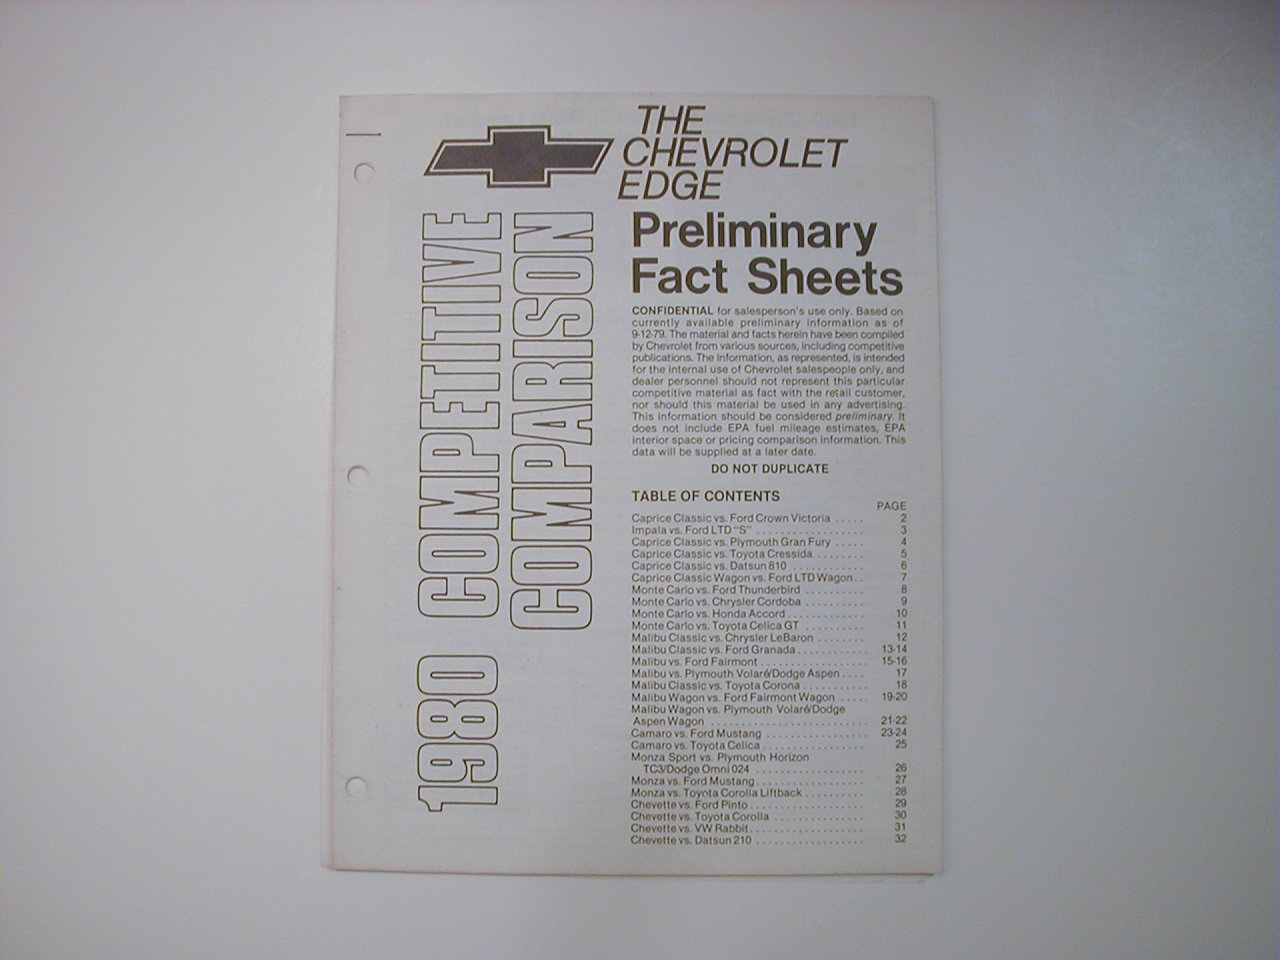 1980 The Chevrolet Edge Preliminary Fact Sheets - Click Image to Close